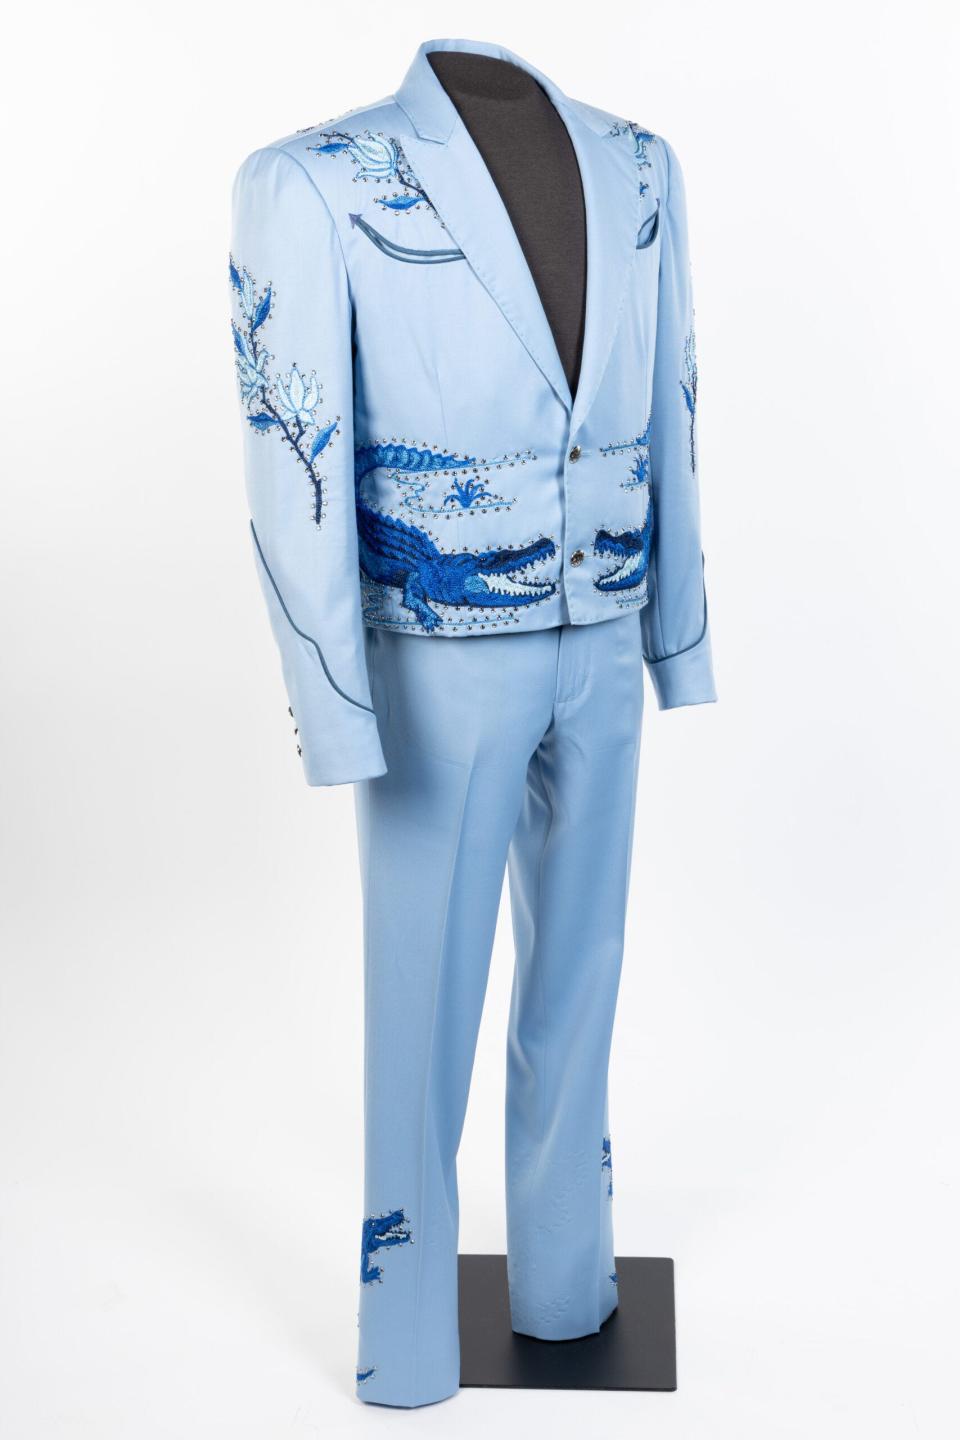 Charley Crockett wore this suit when he performed at the Palomino Music Festival in Pasadena, California, on July 9, 2022.